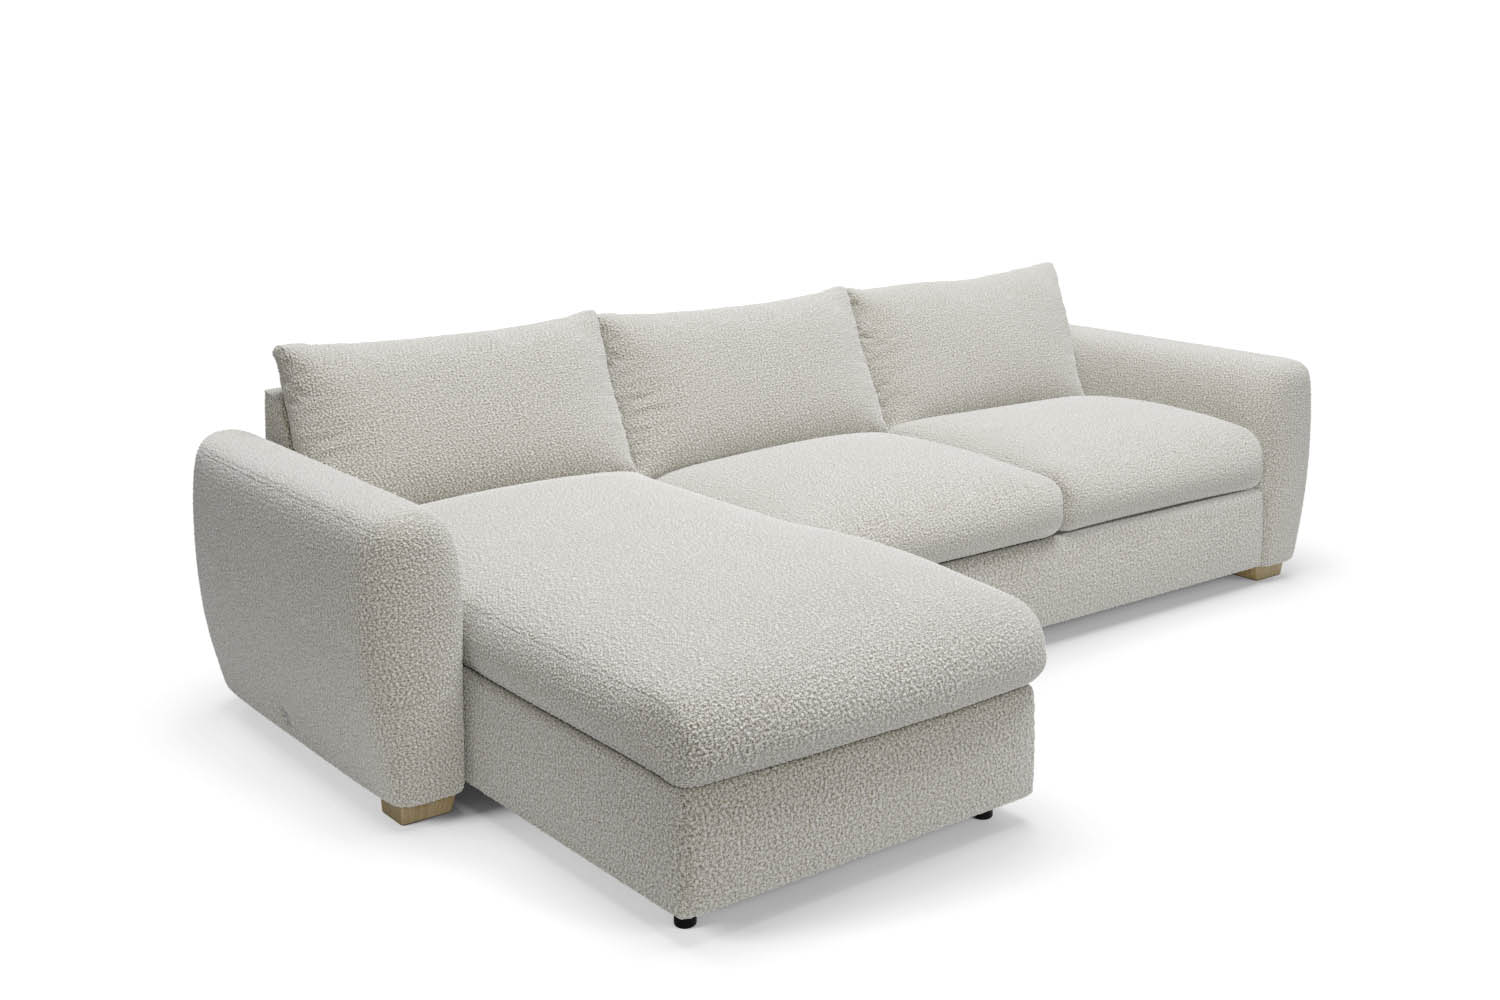 The Cloud Sundae - Chaise Sofa Bed - Fuzzy White Boucle